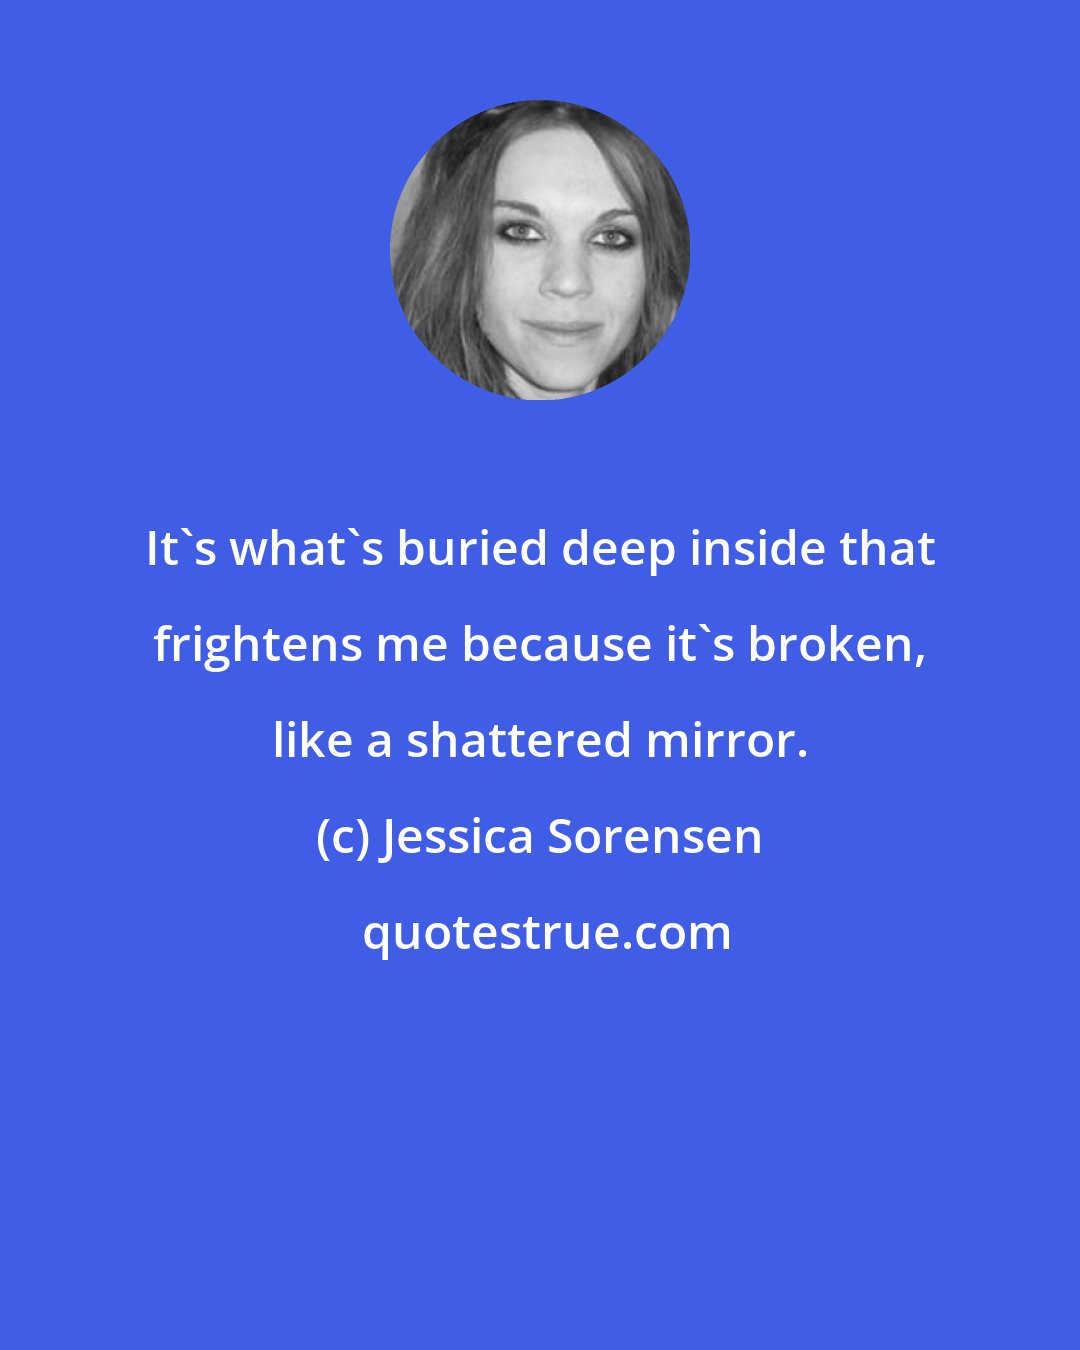 Jessica Sorensen: It's what's buried deep inside that frightens me because it's broken, like a shattered mirror.